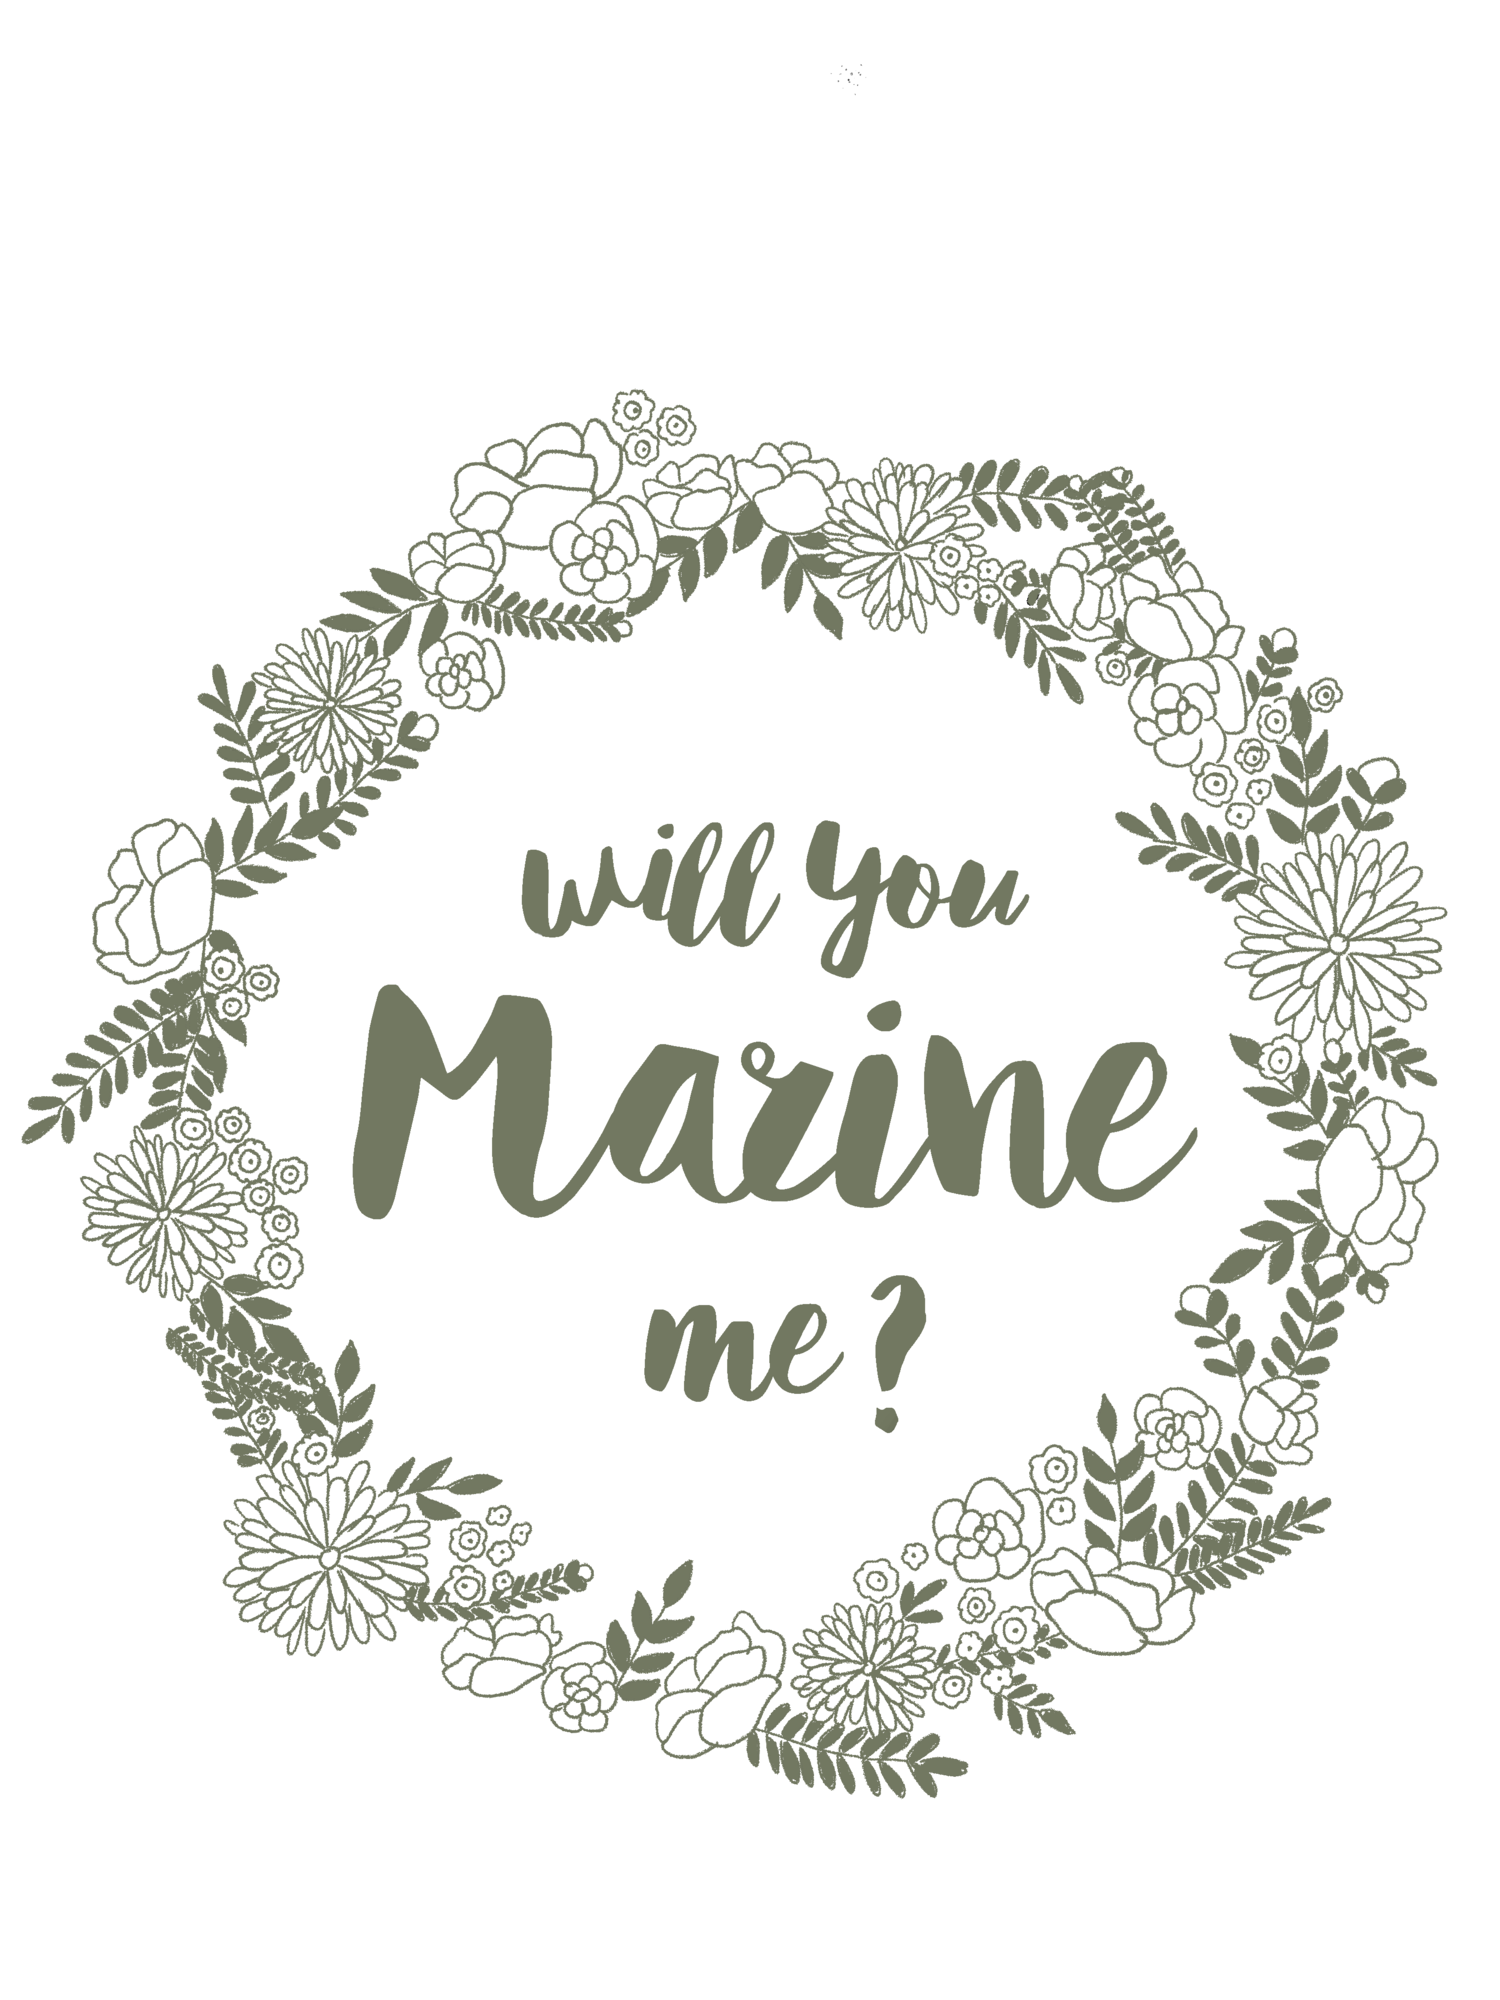 Will you Marine me